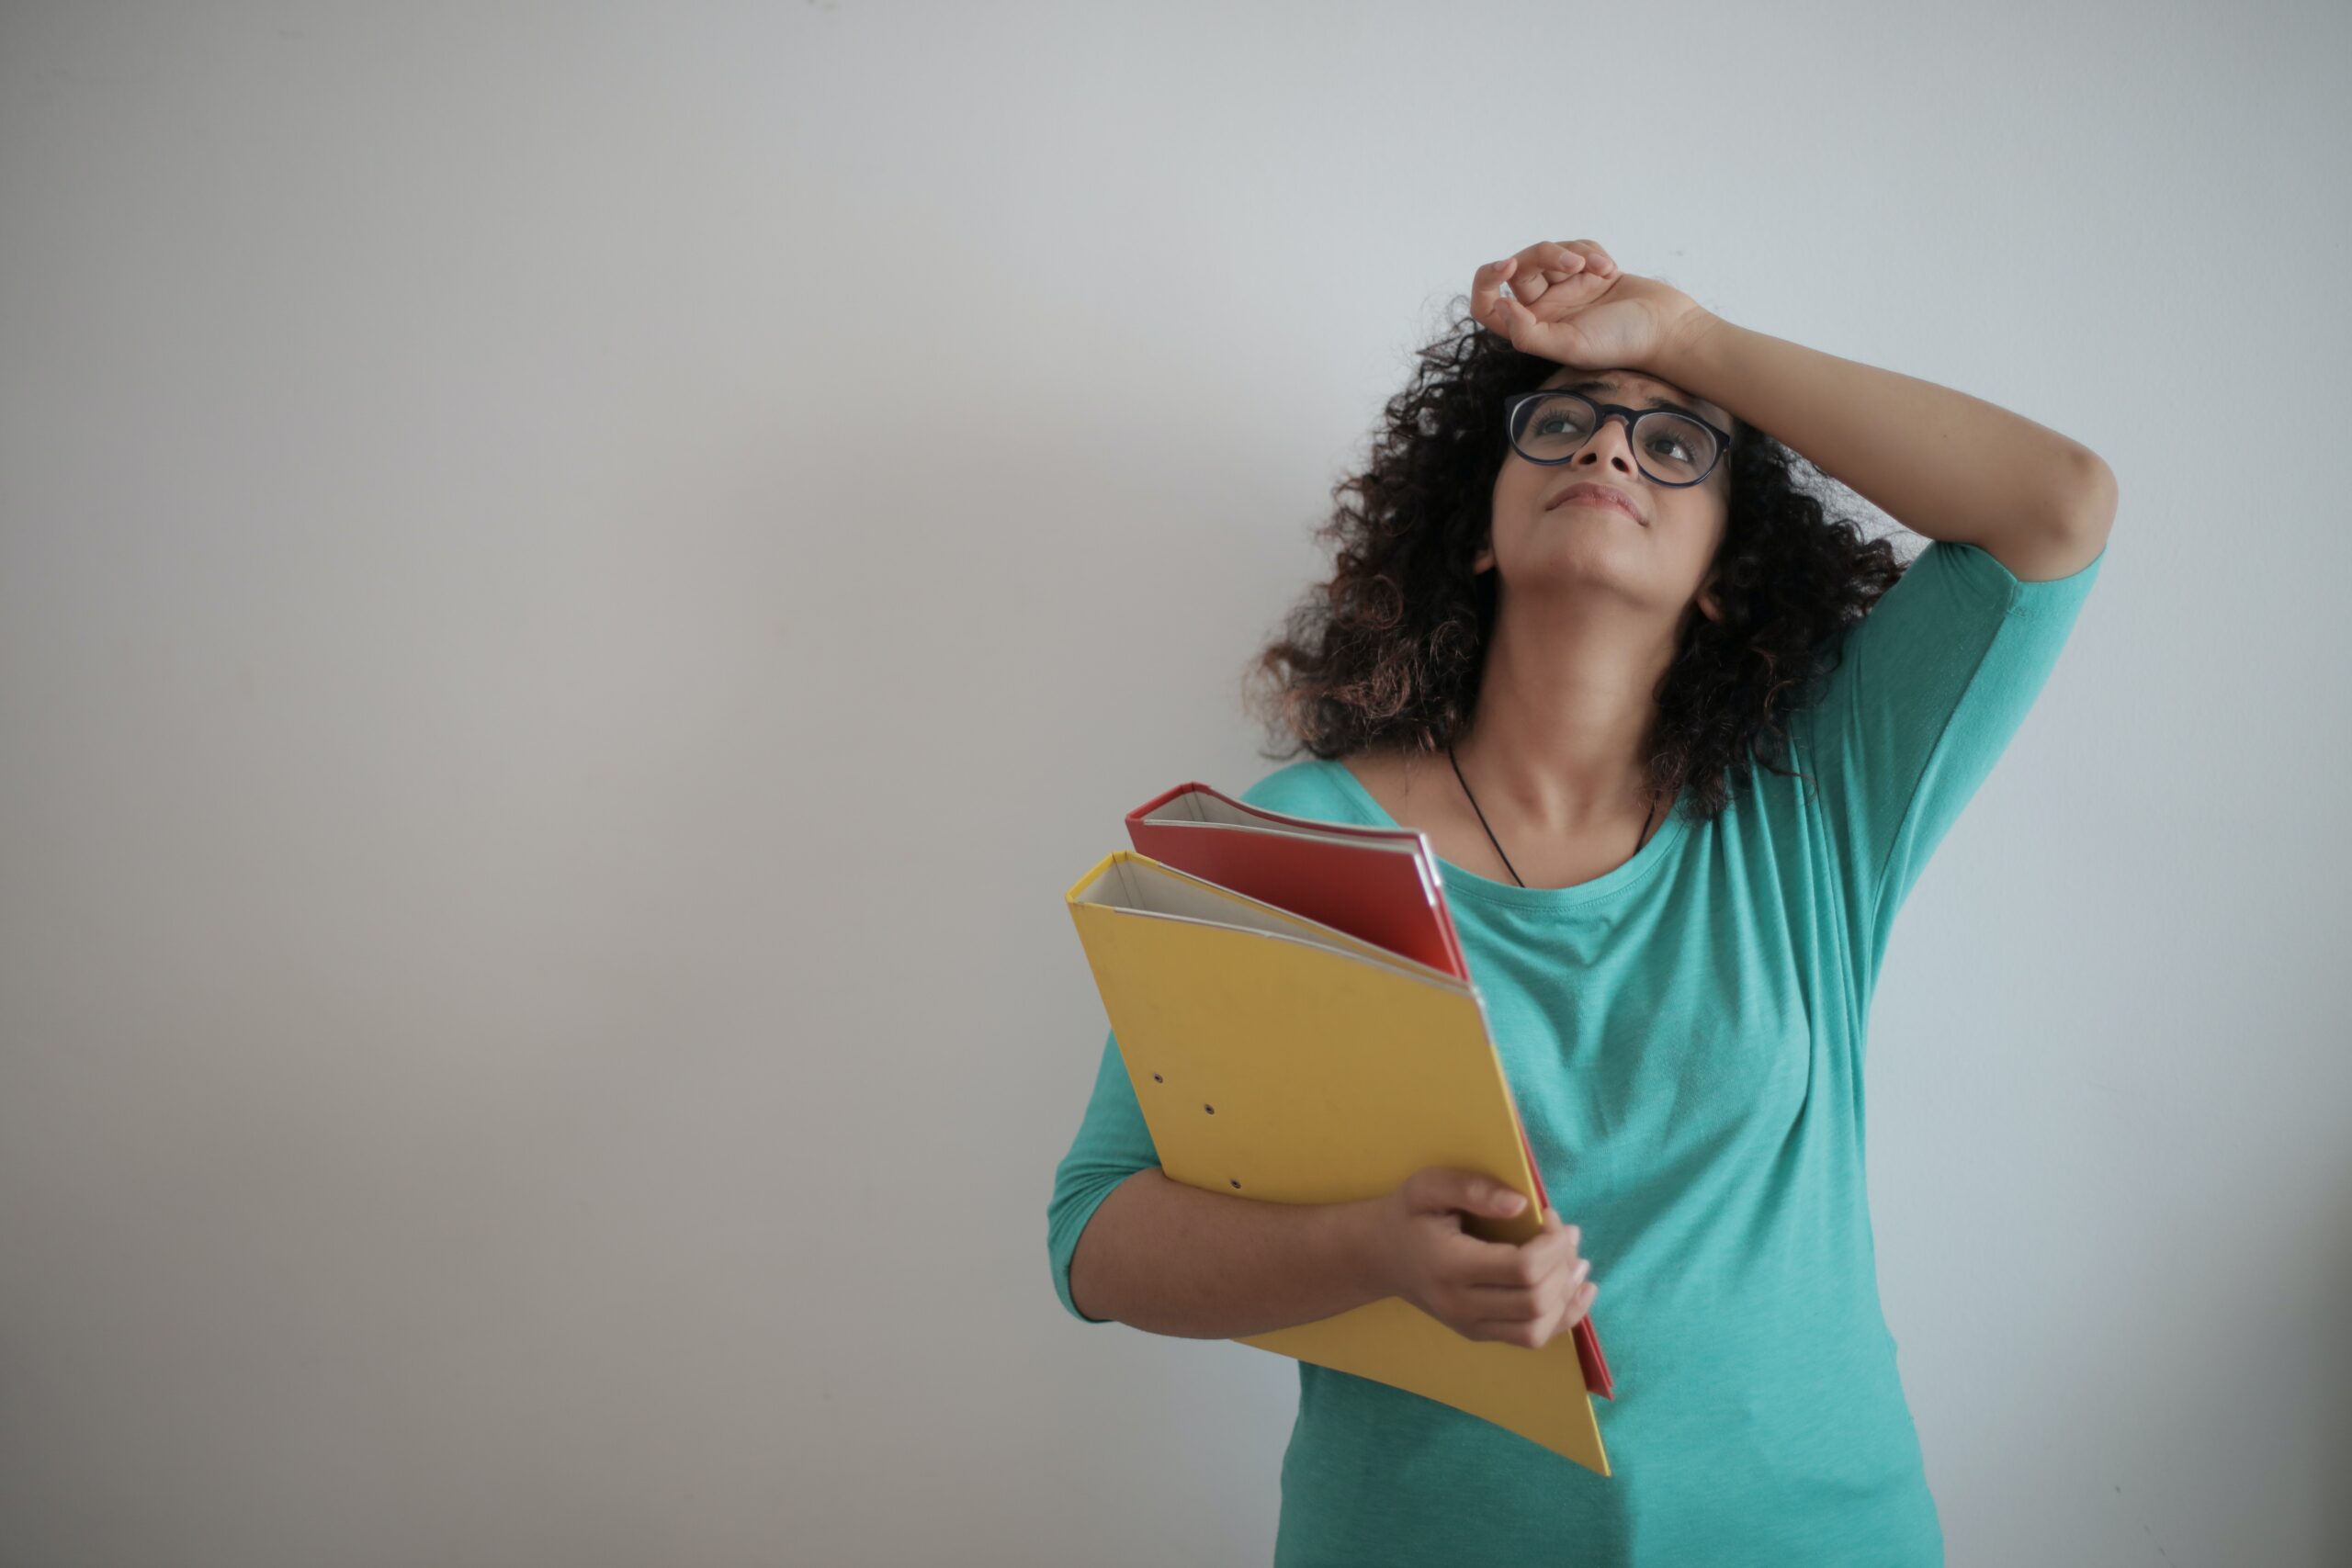 A feminine presenting person wearing a turquoise top, standing against a white wall holding some files with one hand raised to their head in exasperation